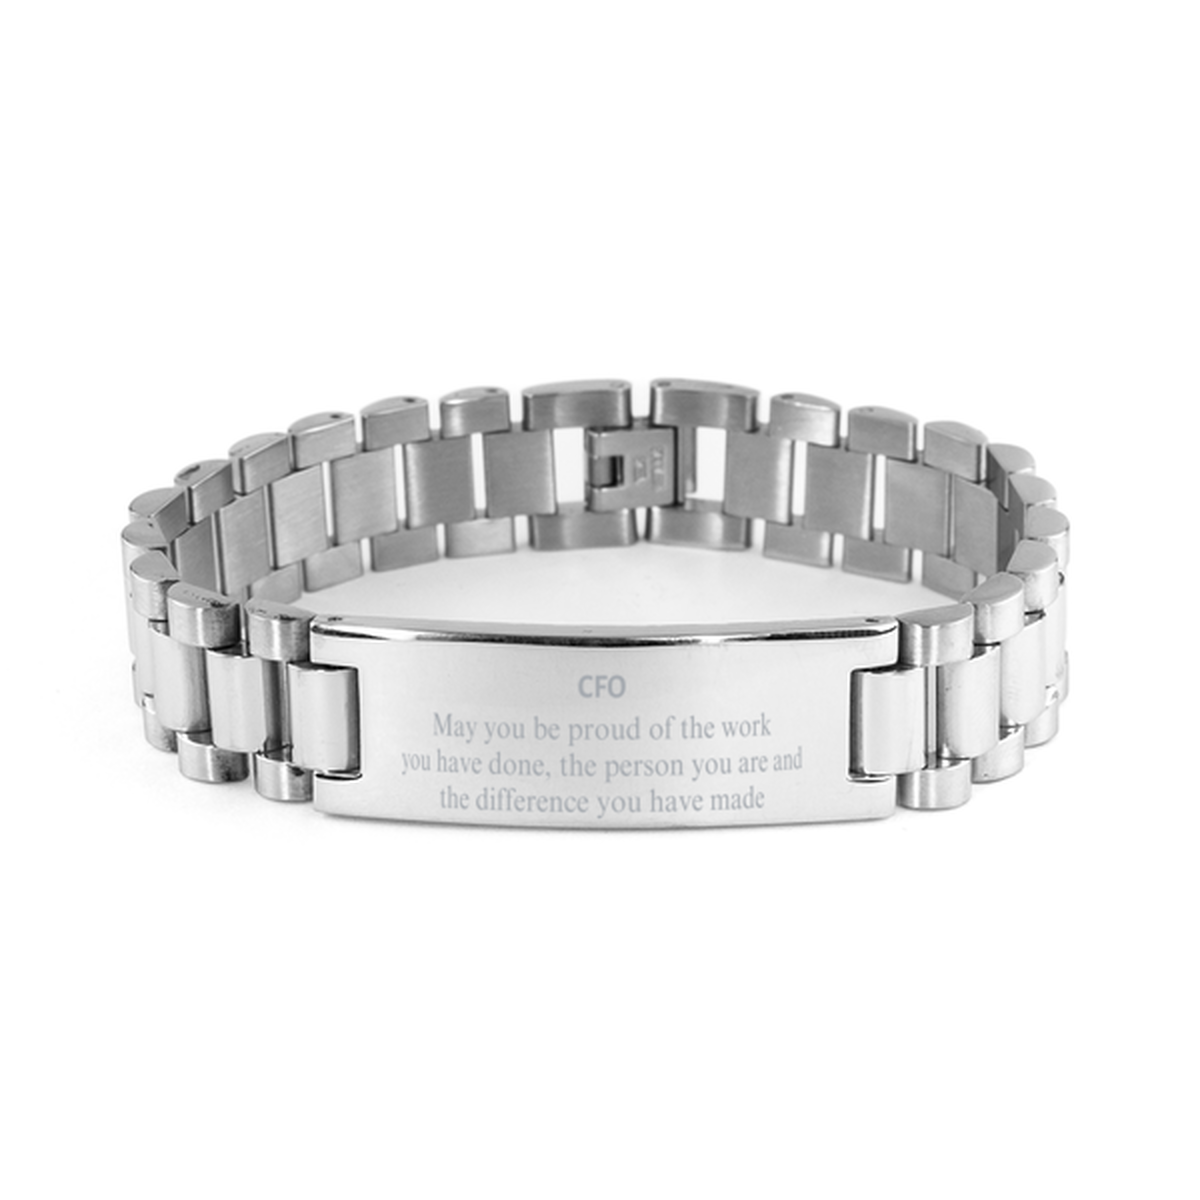 CFO May you be proud of the work you have done, Retirement CFO Ladder Stainless Steel Bracelet for Colleague Appreciation Gifts Amazing for CFO